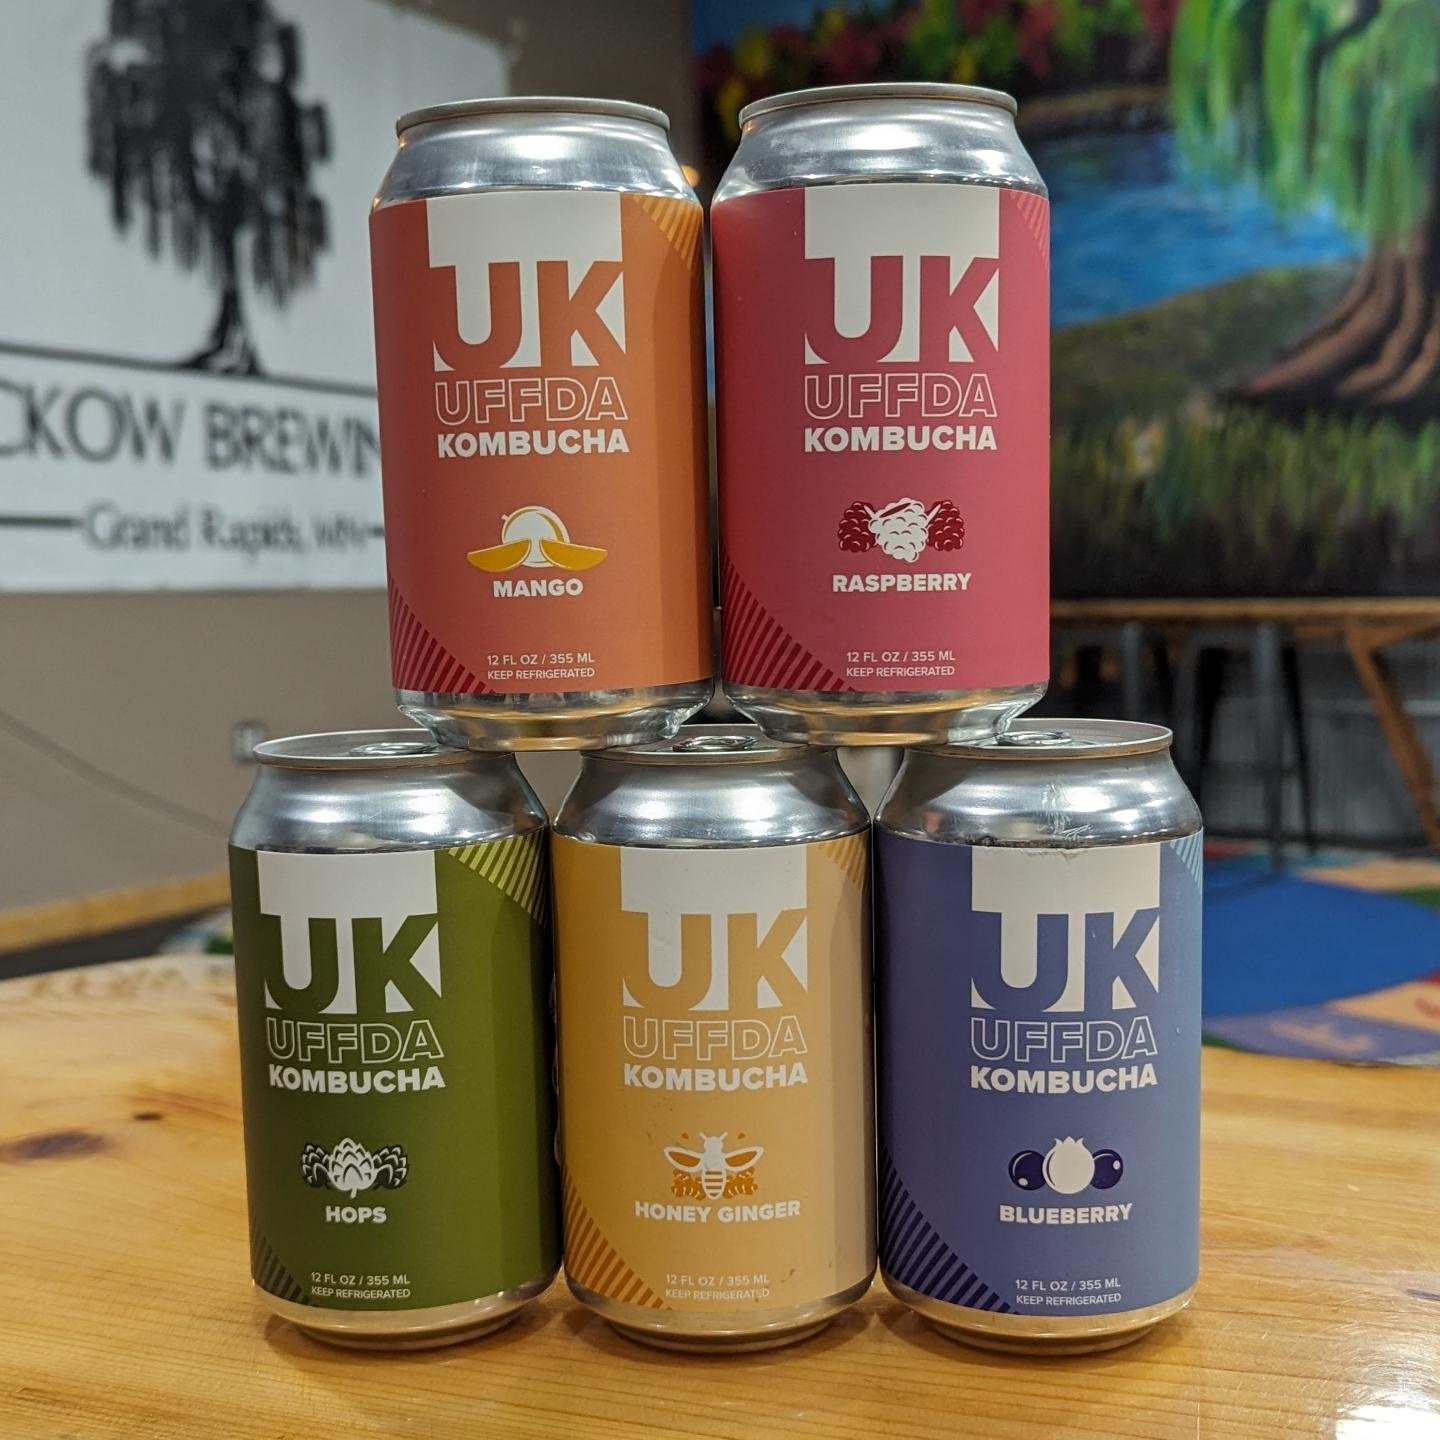 UFFDA KOMBUCHA is now available in the taproom! So many of you have been asking for kombucha and here it is! If you're unfamiliar, it's kinda a probiotic soda made with fermented tea and flavorings and Uffda makes super-delicious booch! Check out @uf